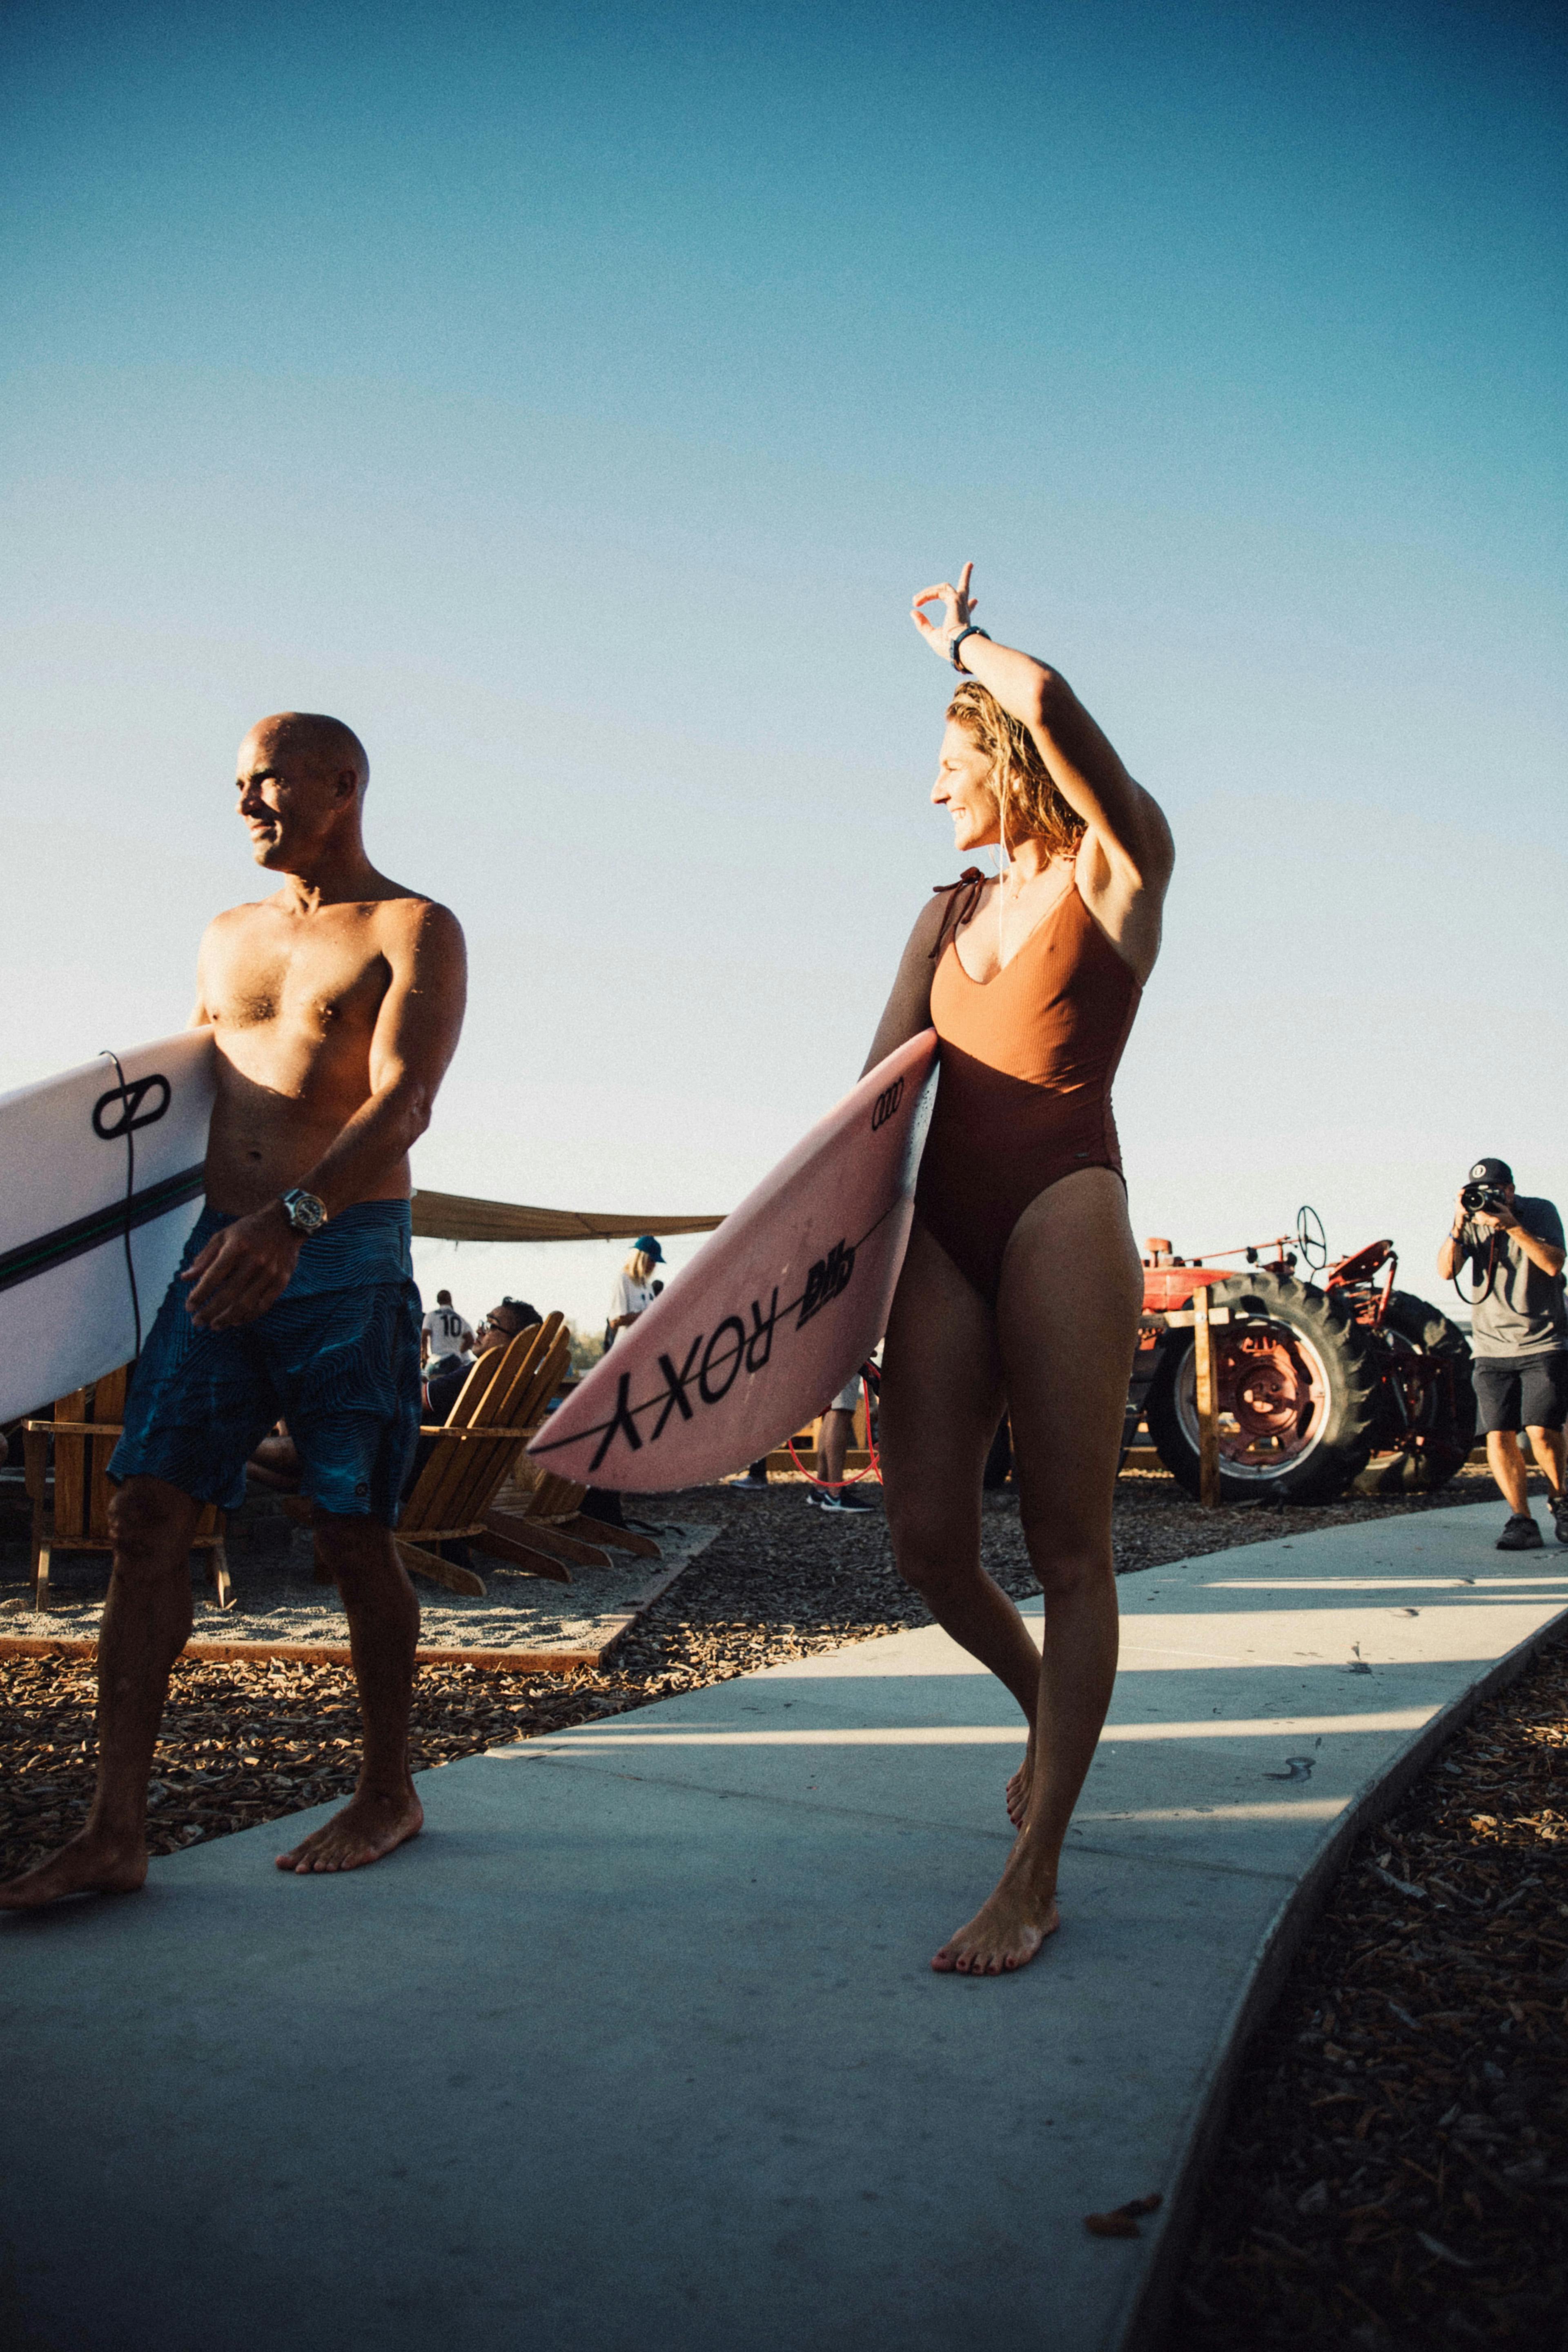 Pro surfers at the Surf Ranch US